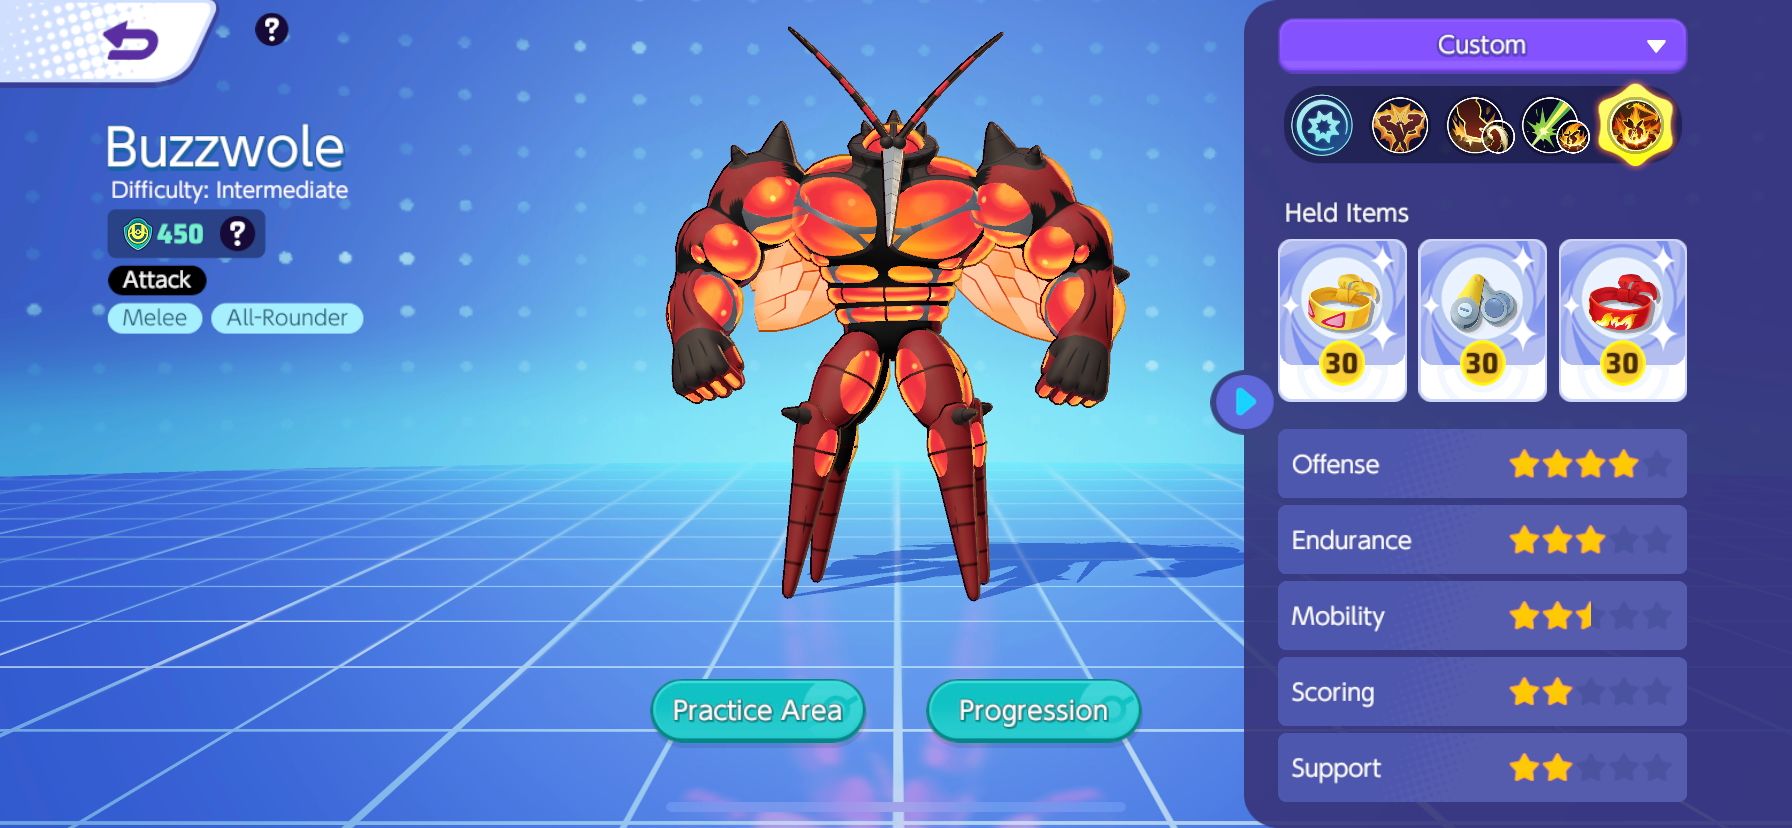 Buzzwole' stat screen from Pokemon Unite, showing moves, Held Items, and stats